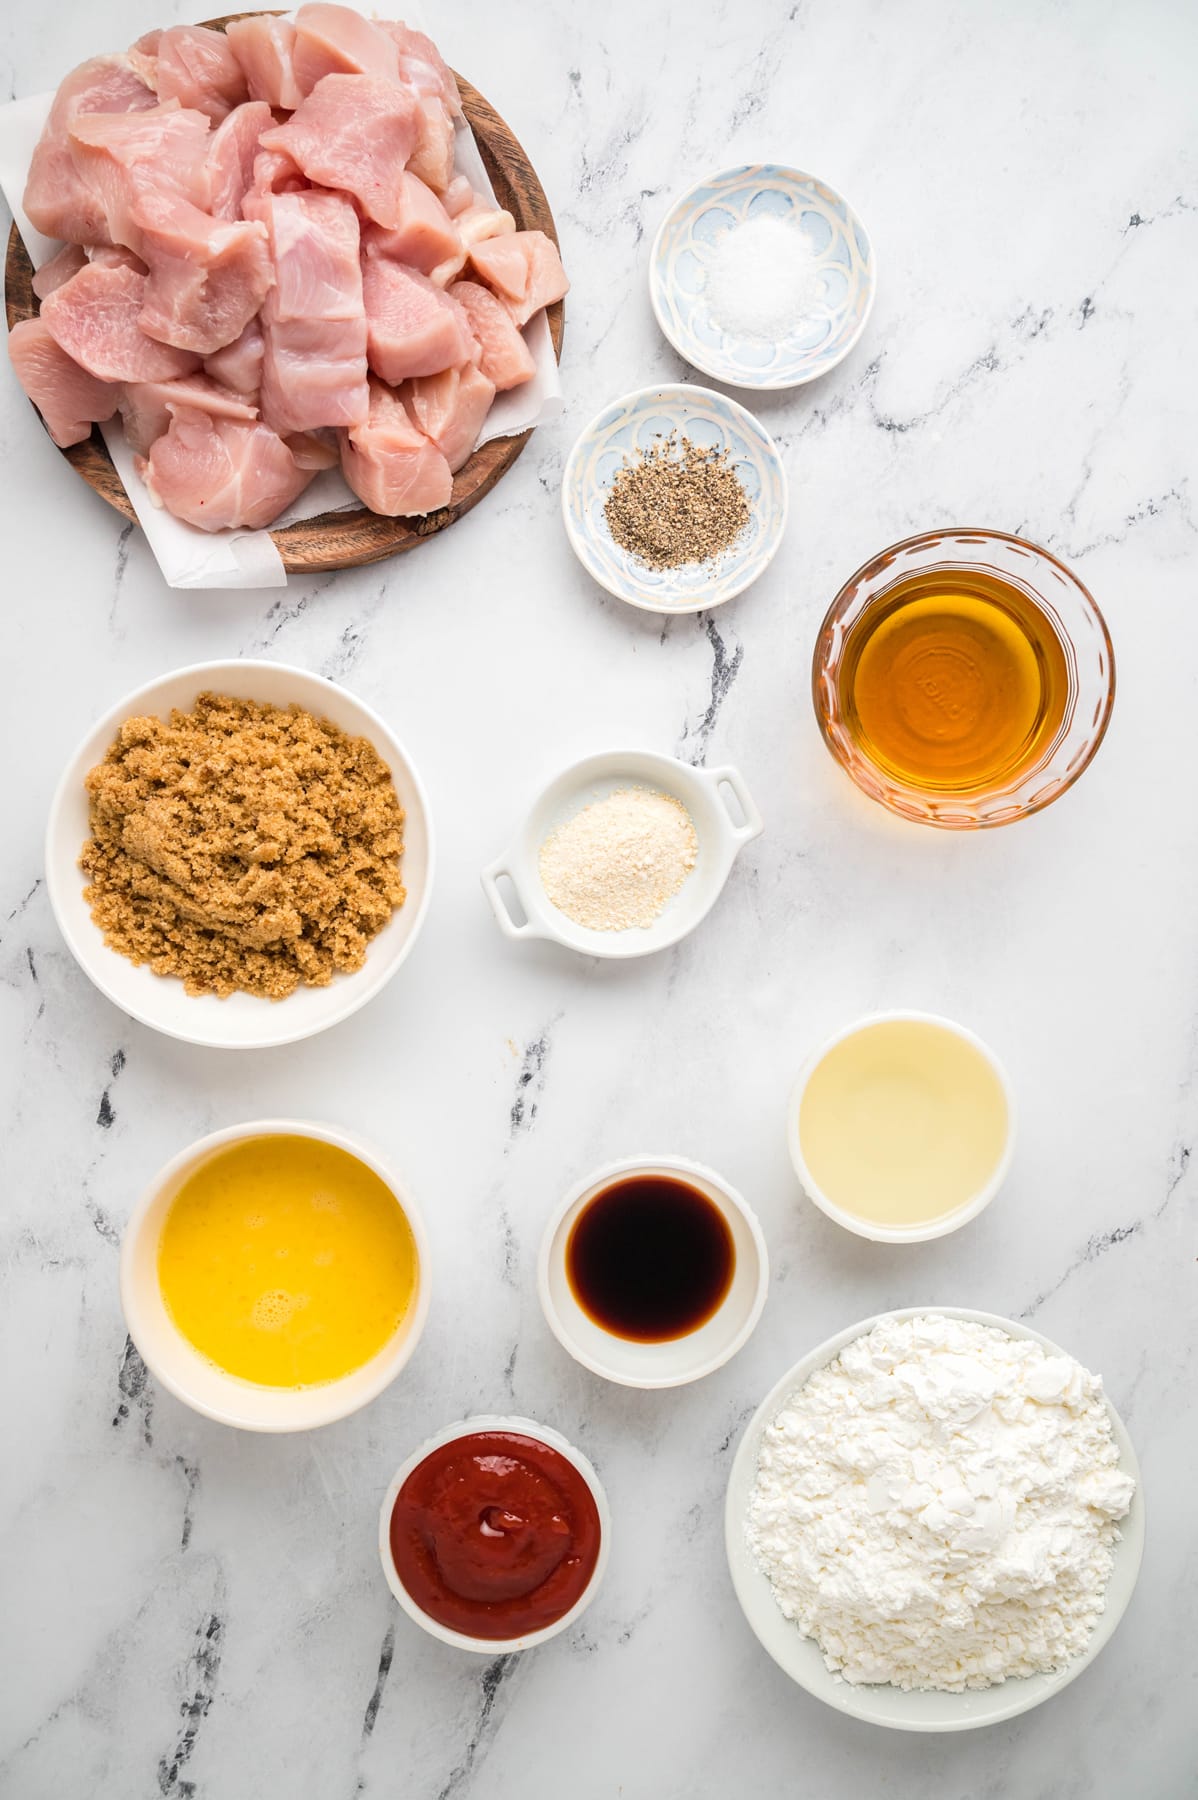 Homemade sweet and sour chicken ingredients